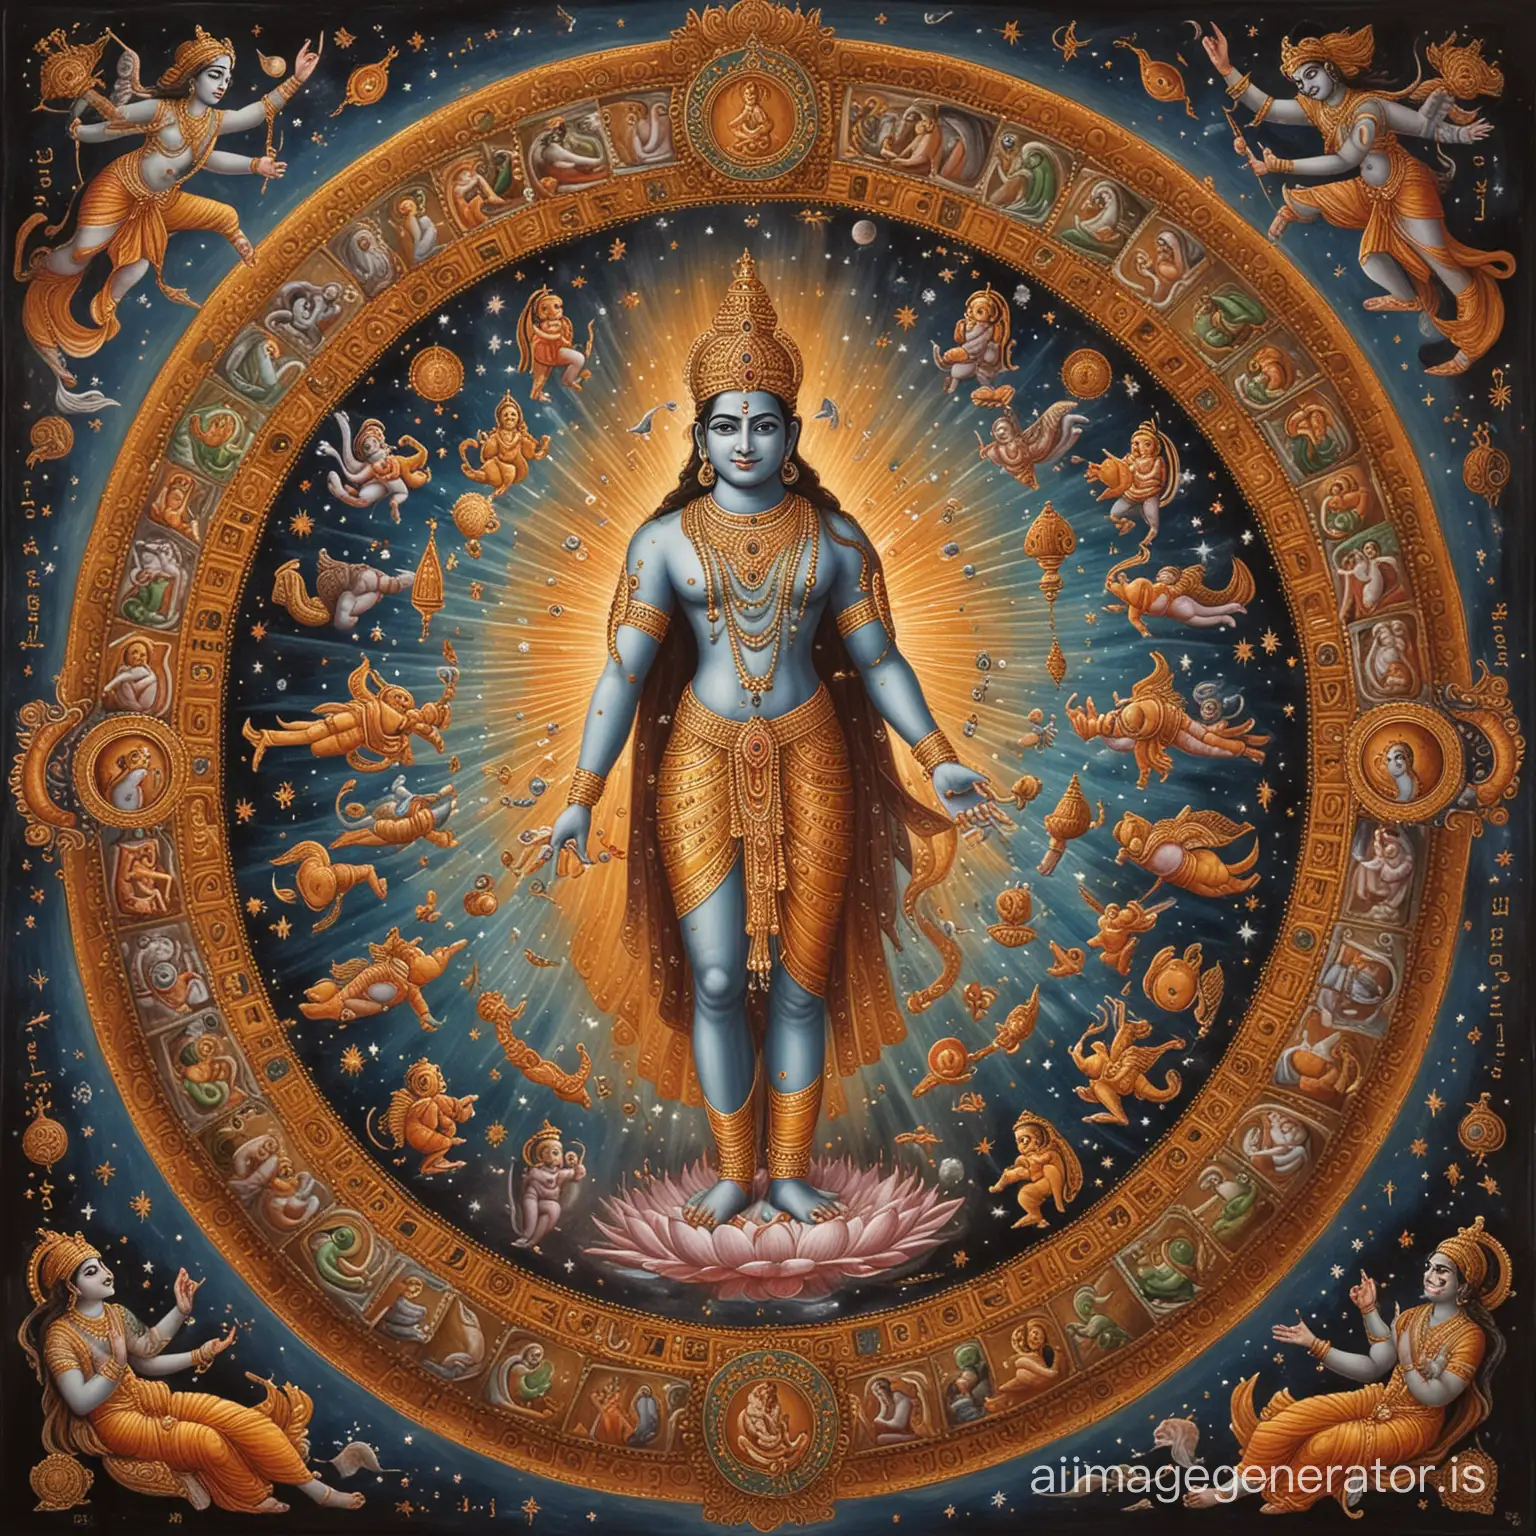 Depict Lord Vishnu in a cosmic form surrounded by divine symbols to capture the essence of the Vishnu Purana.